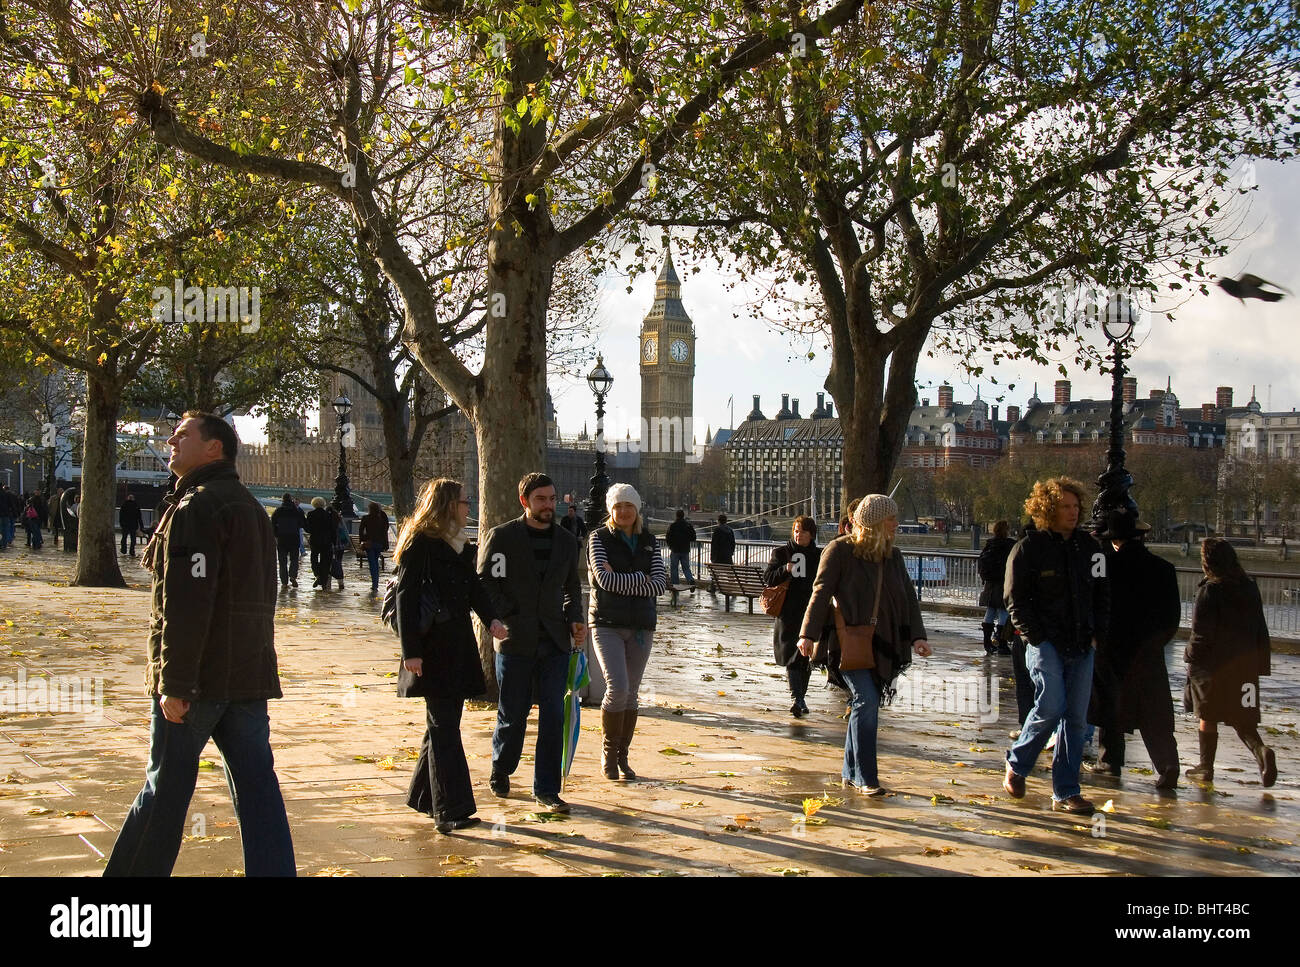 Pedestrians at the South Bank, Big Ben, clock tower, Houses of Parliament, London, England, United Kingdom, Europe Stock Photo